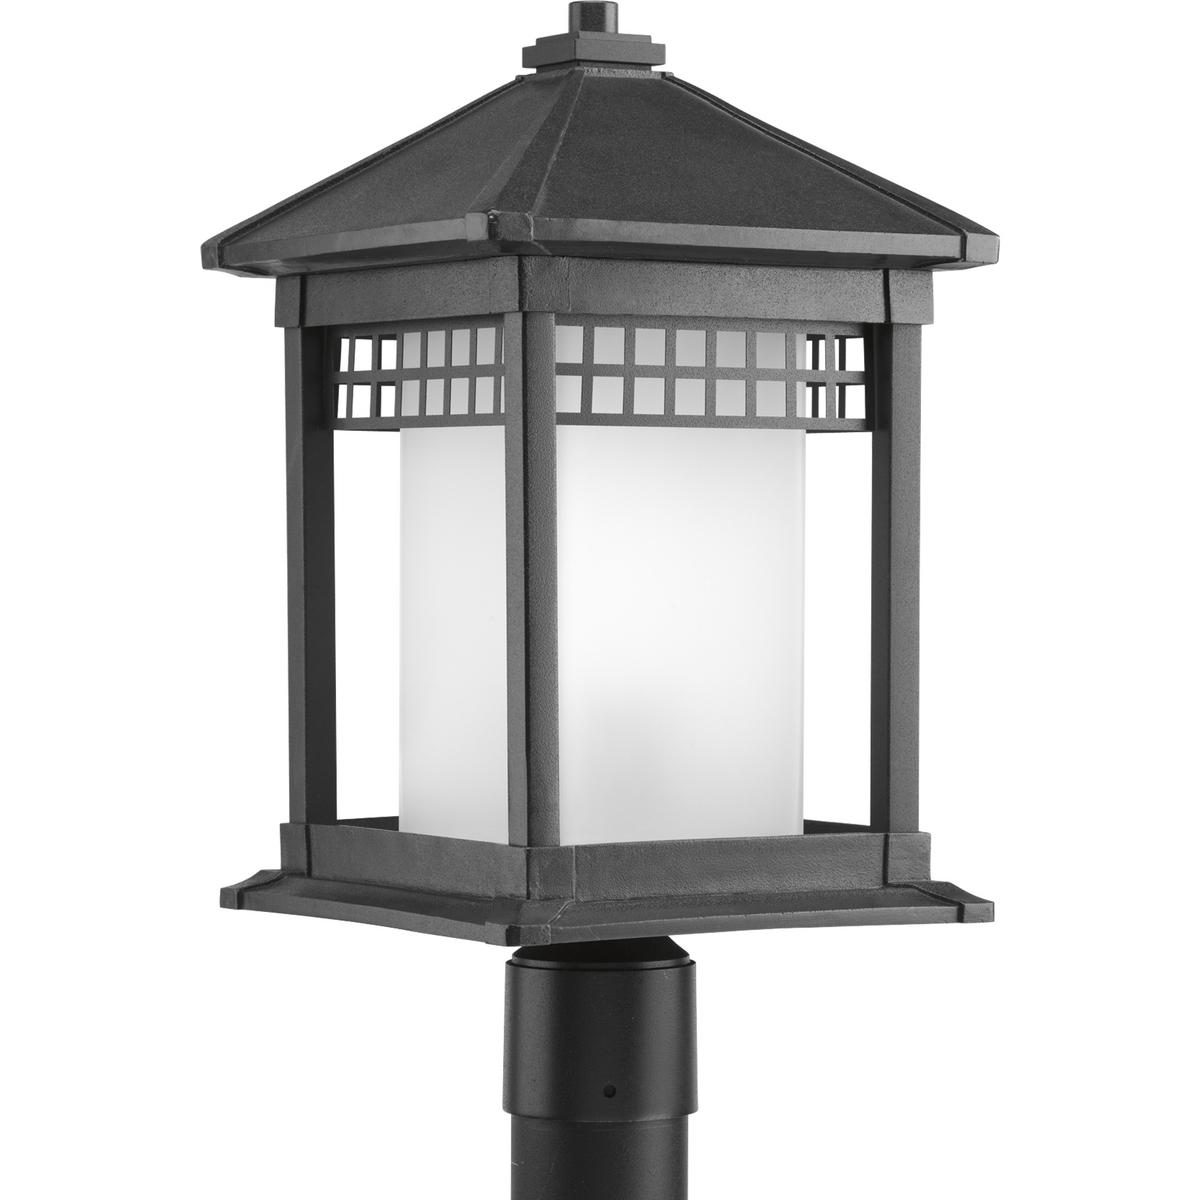 Hubbell P6400-31 Square etched glass shade within rectilinear frame which showcases pierced grid pattern. One-light post lantern in a durable powder coat finish.  ; Square etched glass shade within rectilinear frame. ; Pierced grid pattern. ; Durable powder coat finish.